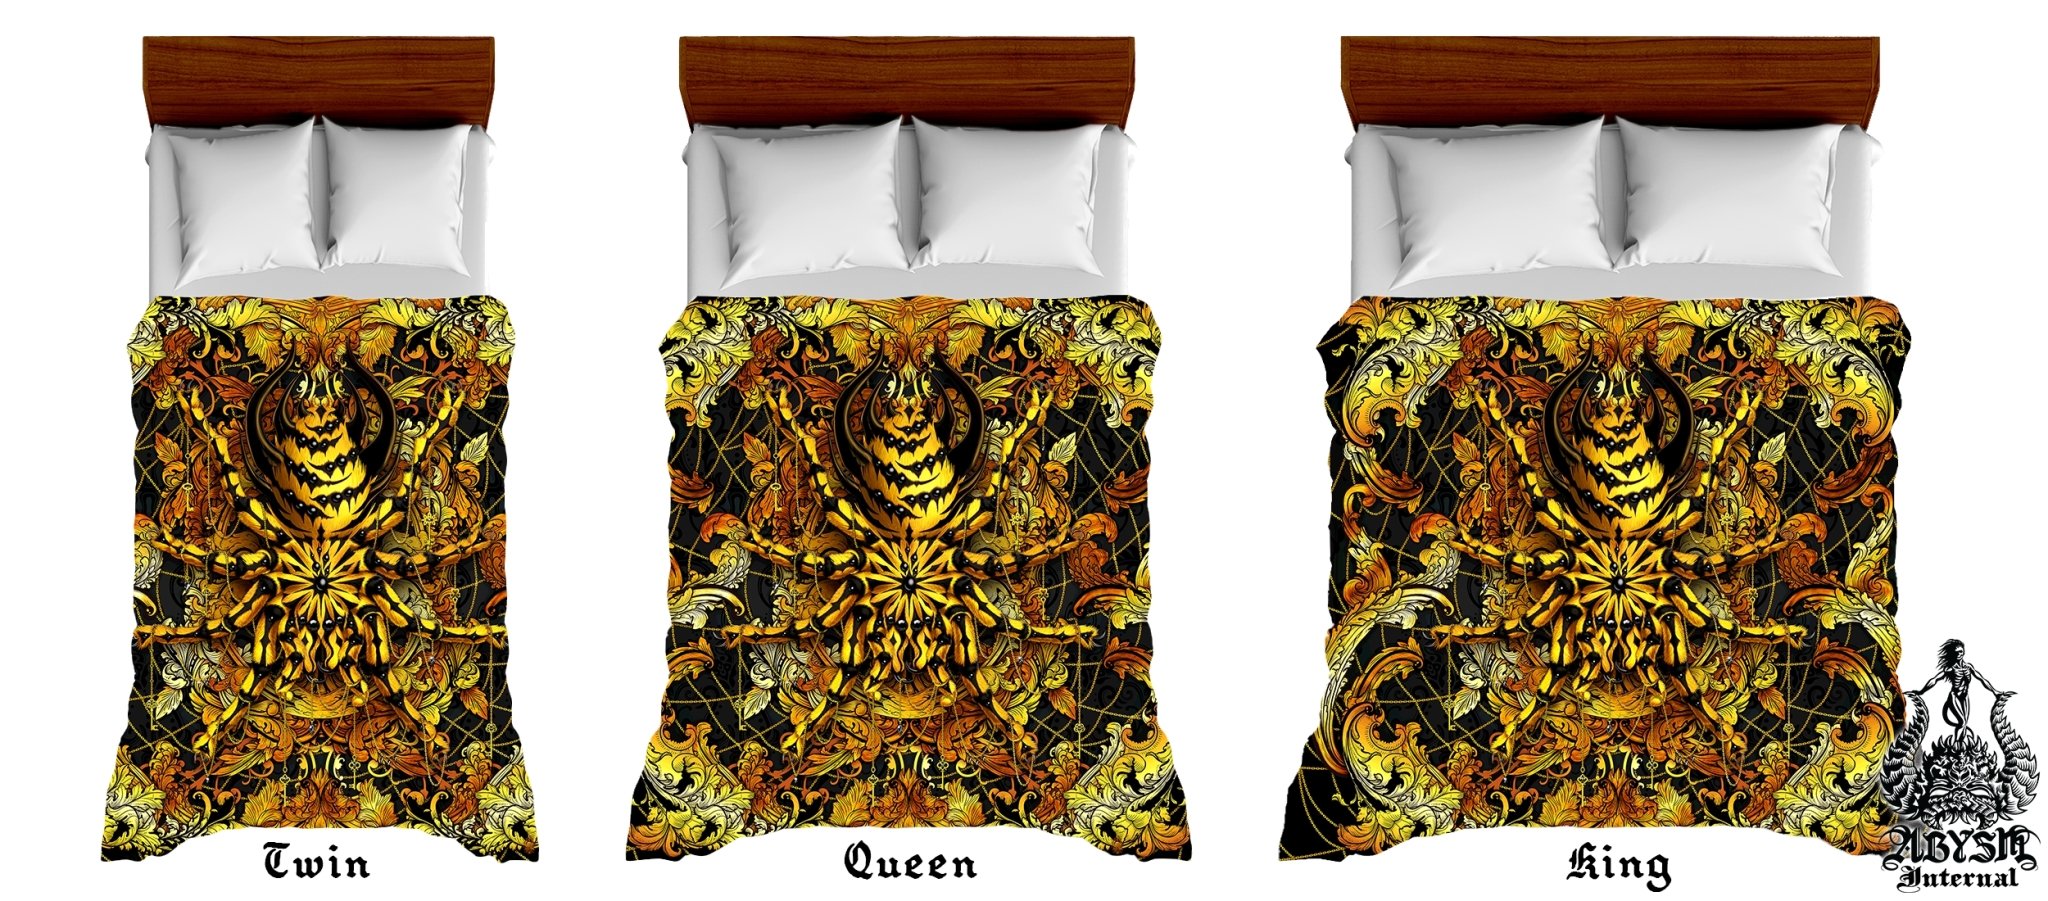 Spider Bedding Set, Comforter and Duvet, Bed Cover and Bedroom Decor, King, Queen and Twin Size - Tarantula Gold Black - Abysm Internal